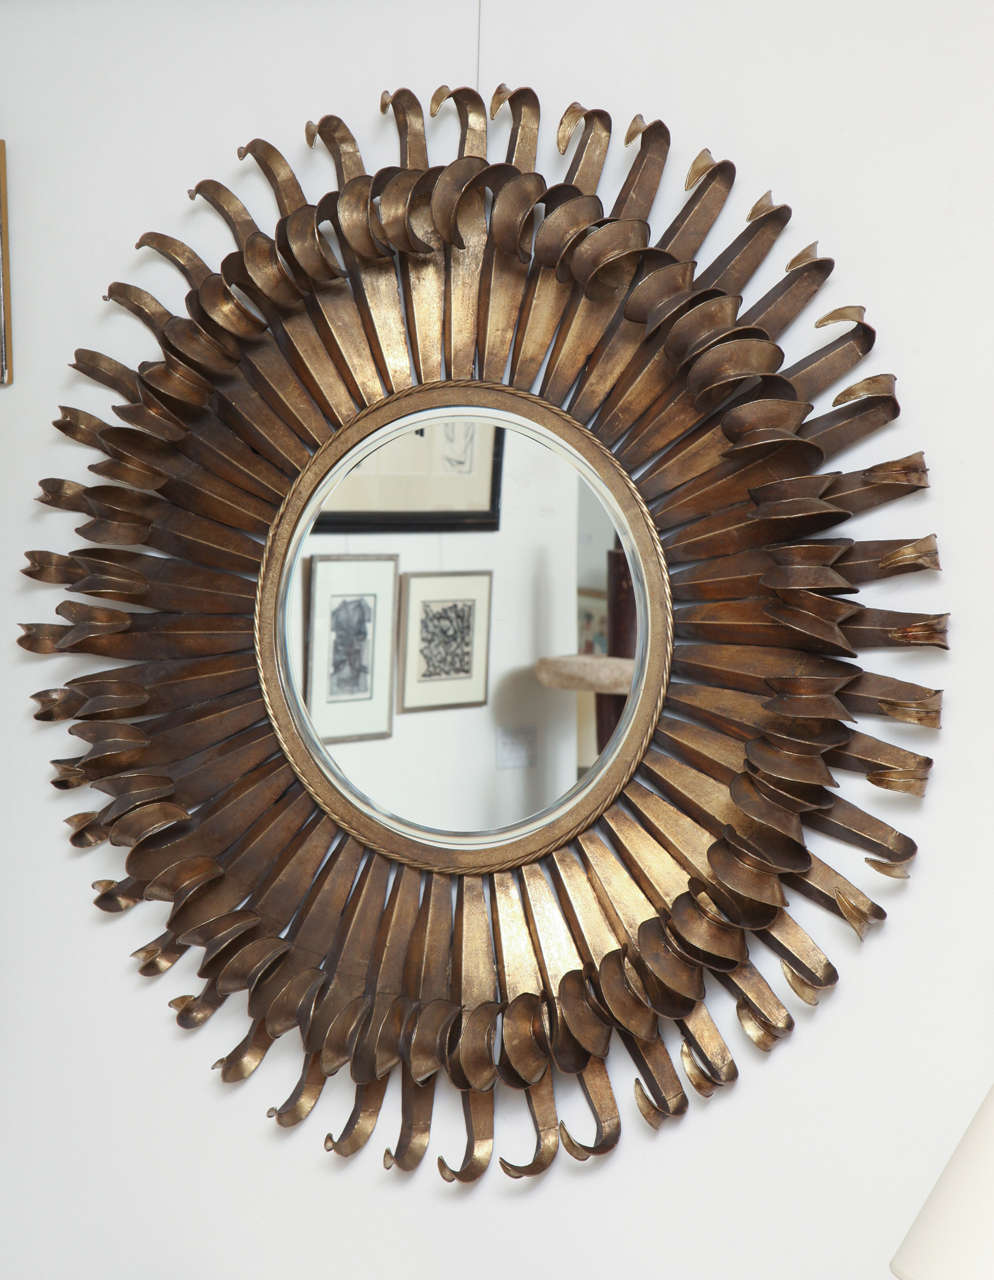 Round gilt iron mirror made of two layers of curled patinated metal in a sunburst style with central beveled mirror